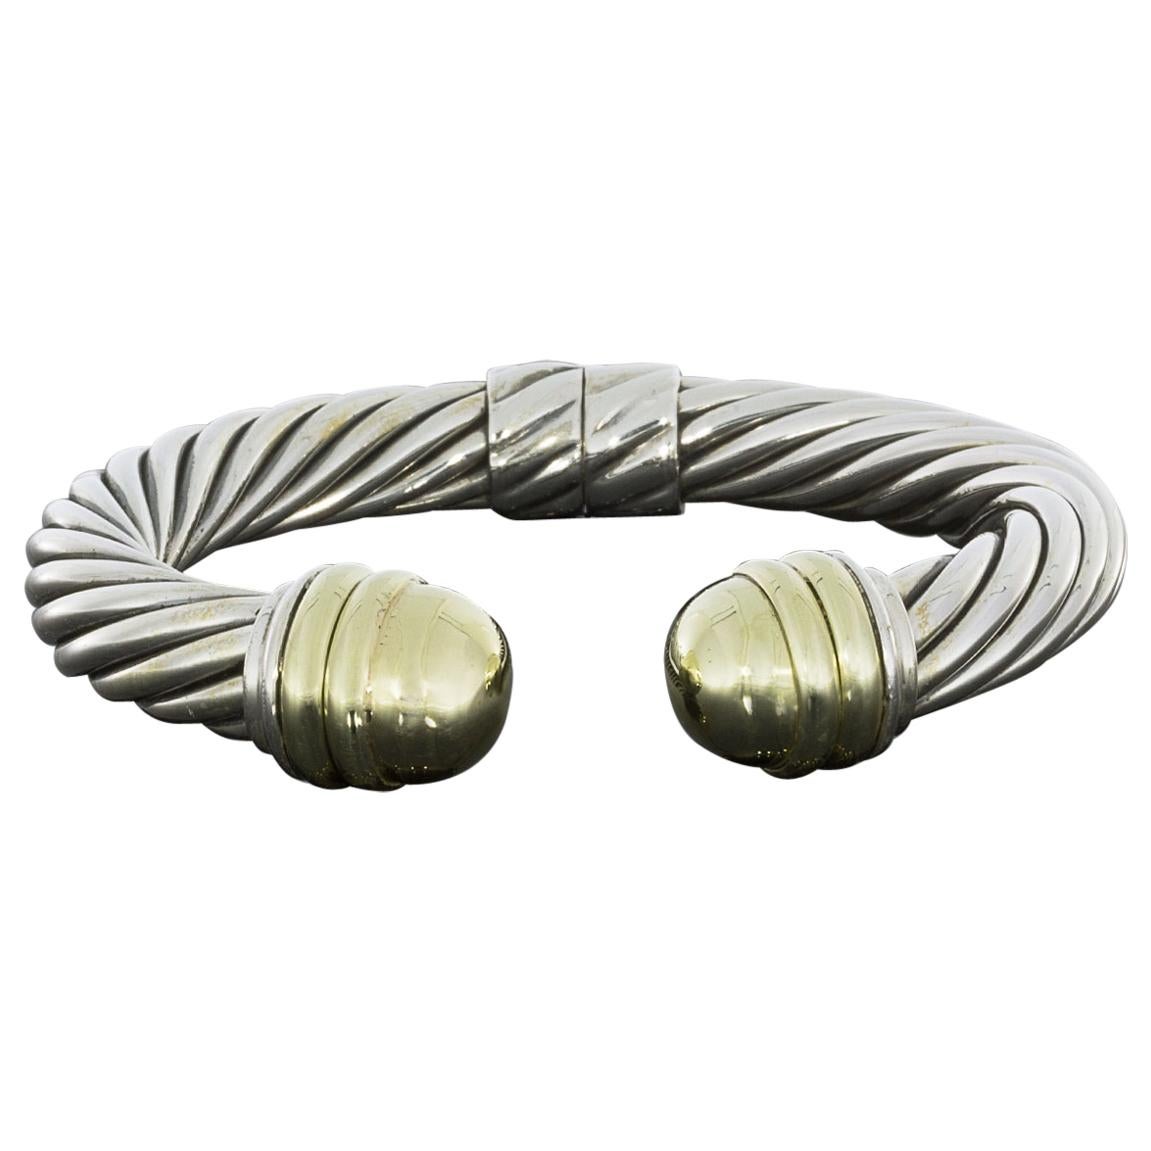 David Yurman Cable Classics Cuff Bracelet with Gold Dome End Caps